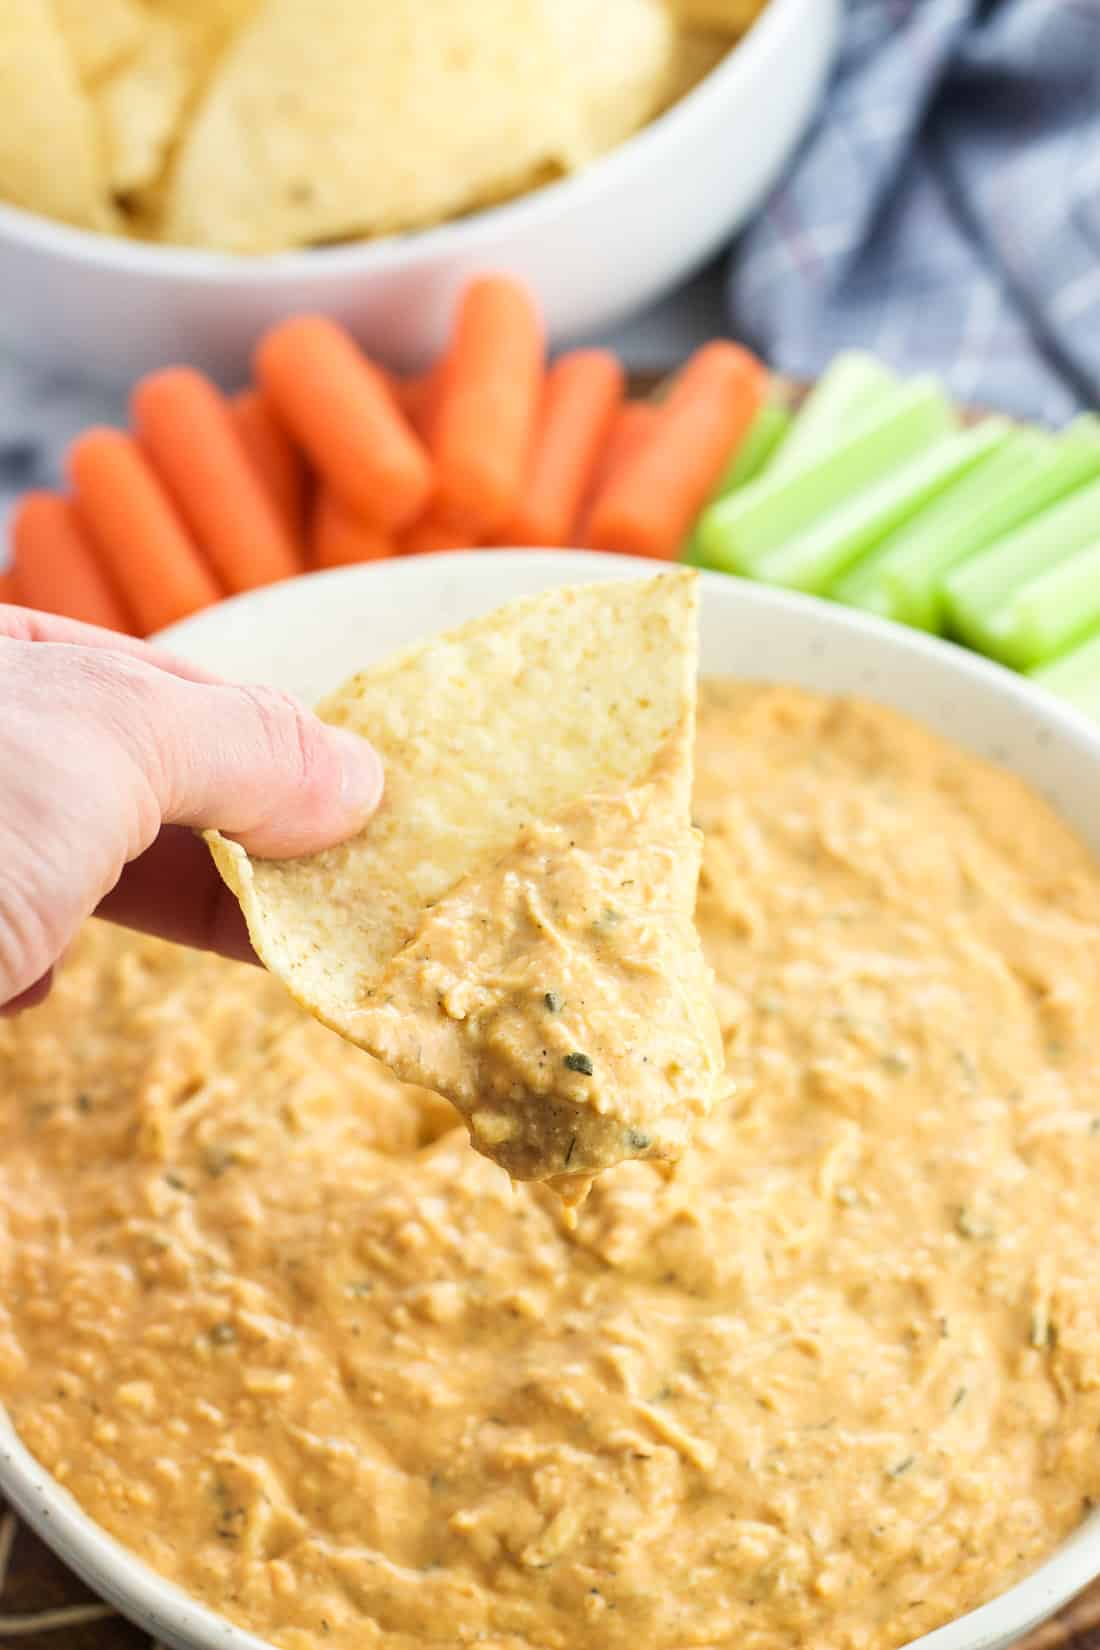 A hand lifting a tortilla chip out of the serving bowl after scooping dip.